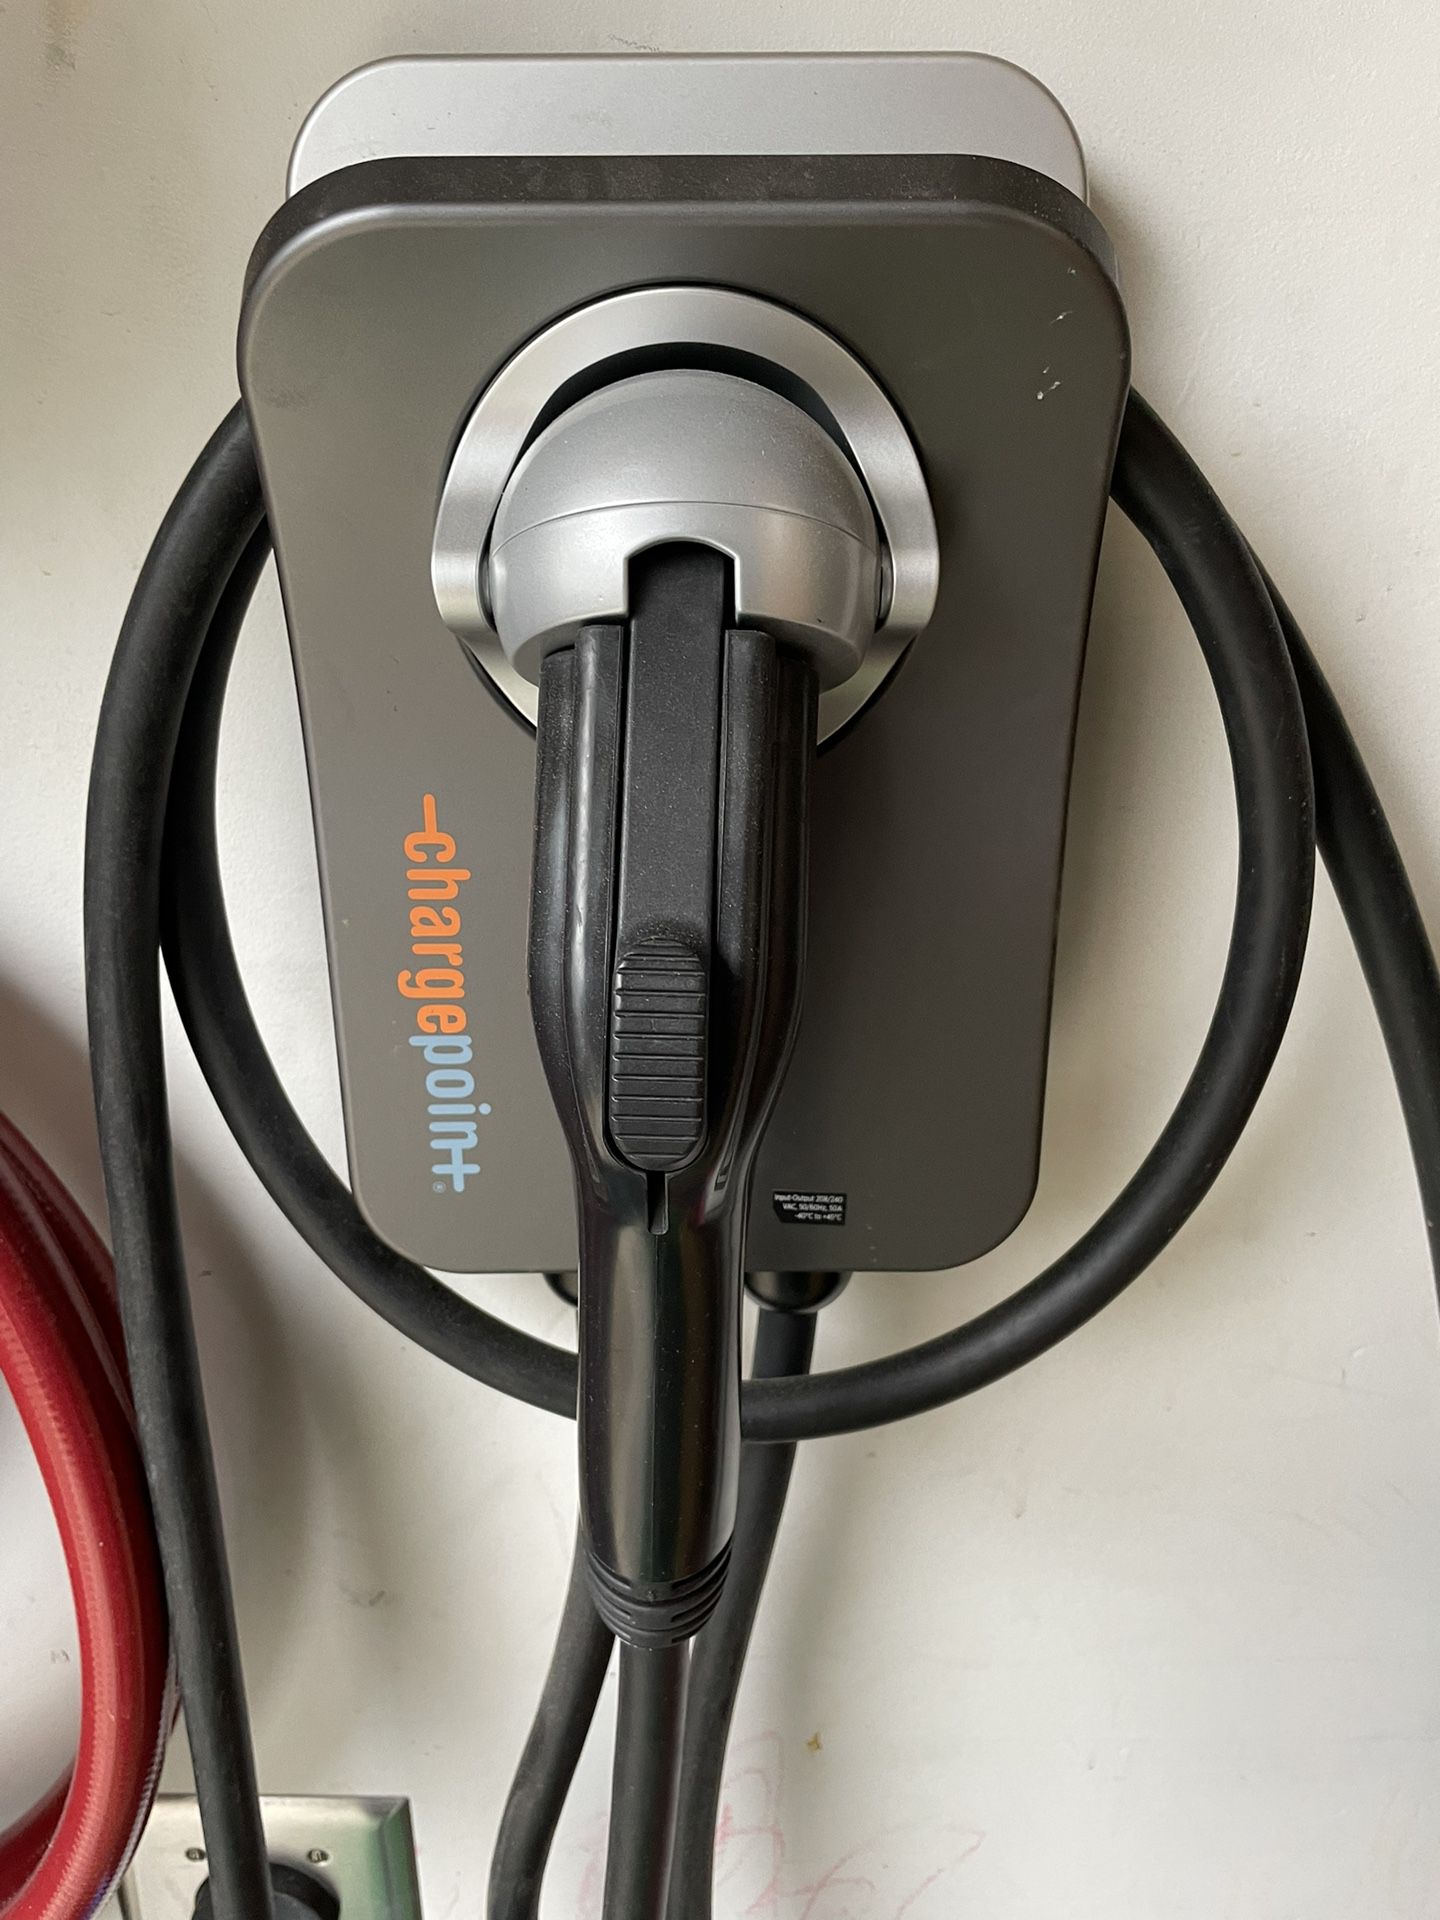 ChargePoint Home Flex Electric Vehicle (EV) Charger, 16 to 50 Amp, 240V, Level  WiFi Enabled EVSE, UL Listed, ENERGY STAR, NEMA 14-50 Plug or Hardwir for  Sale in West Springfield, VA OfferUp